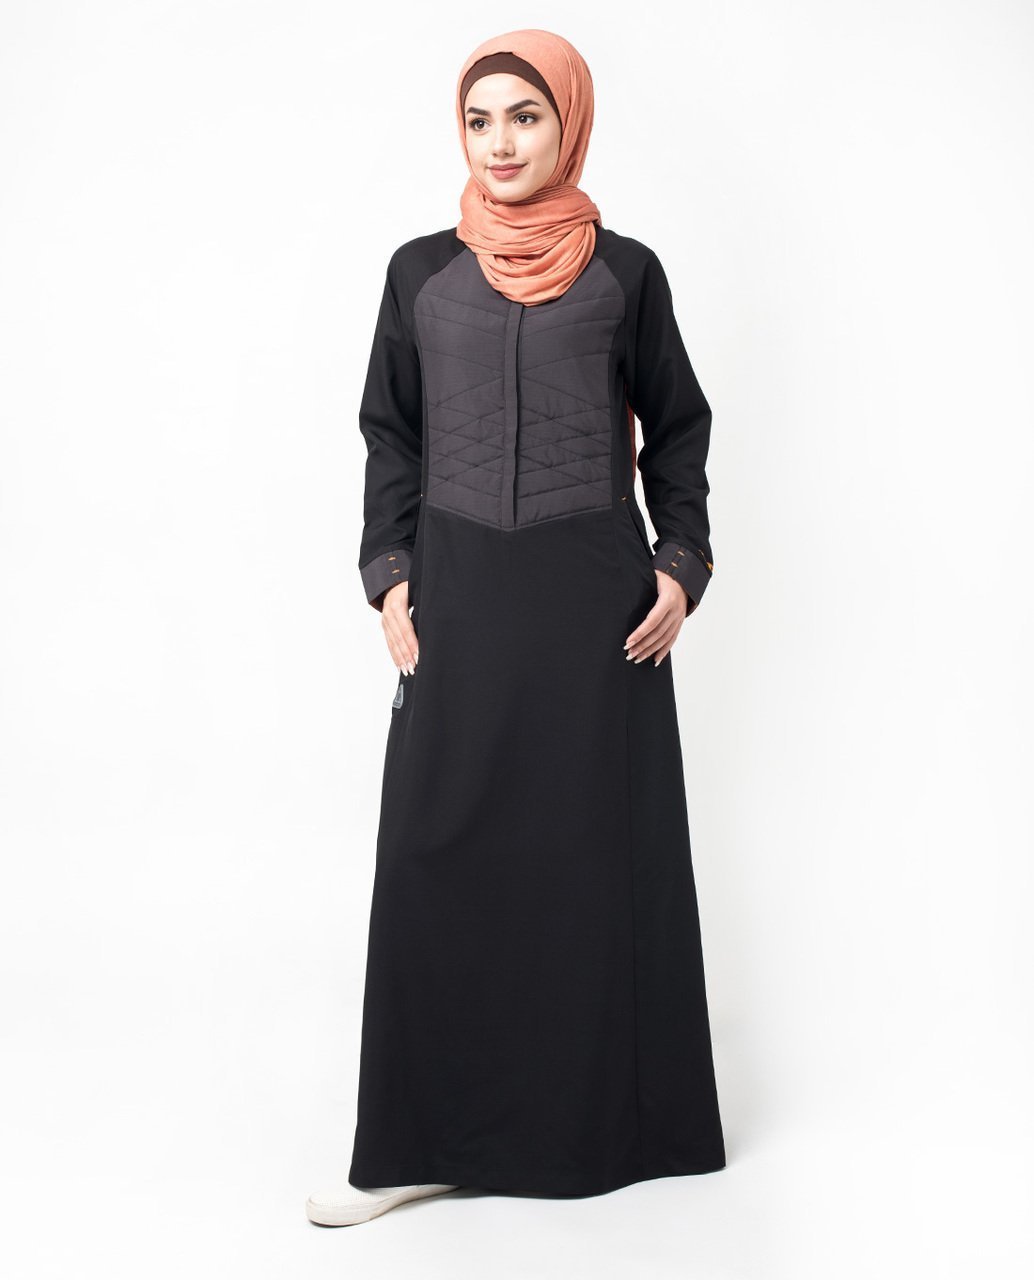 Unique Quilted Button Front Black Abaya Jilbab S 54 Black